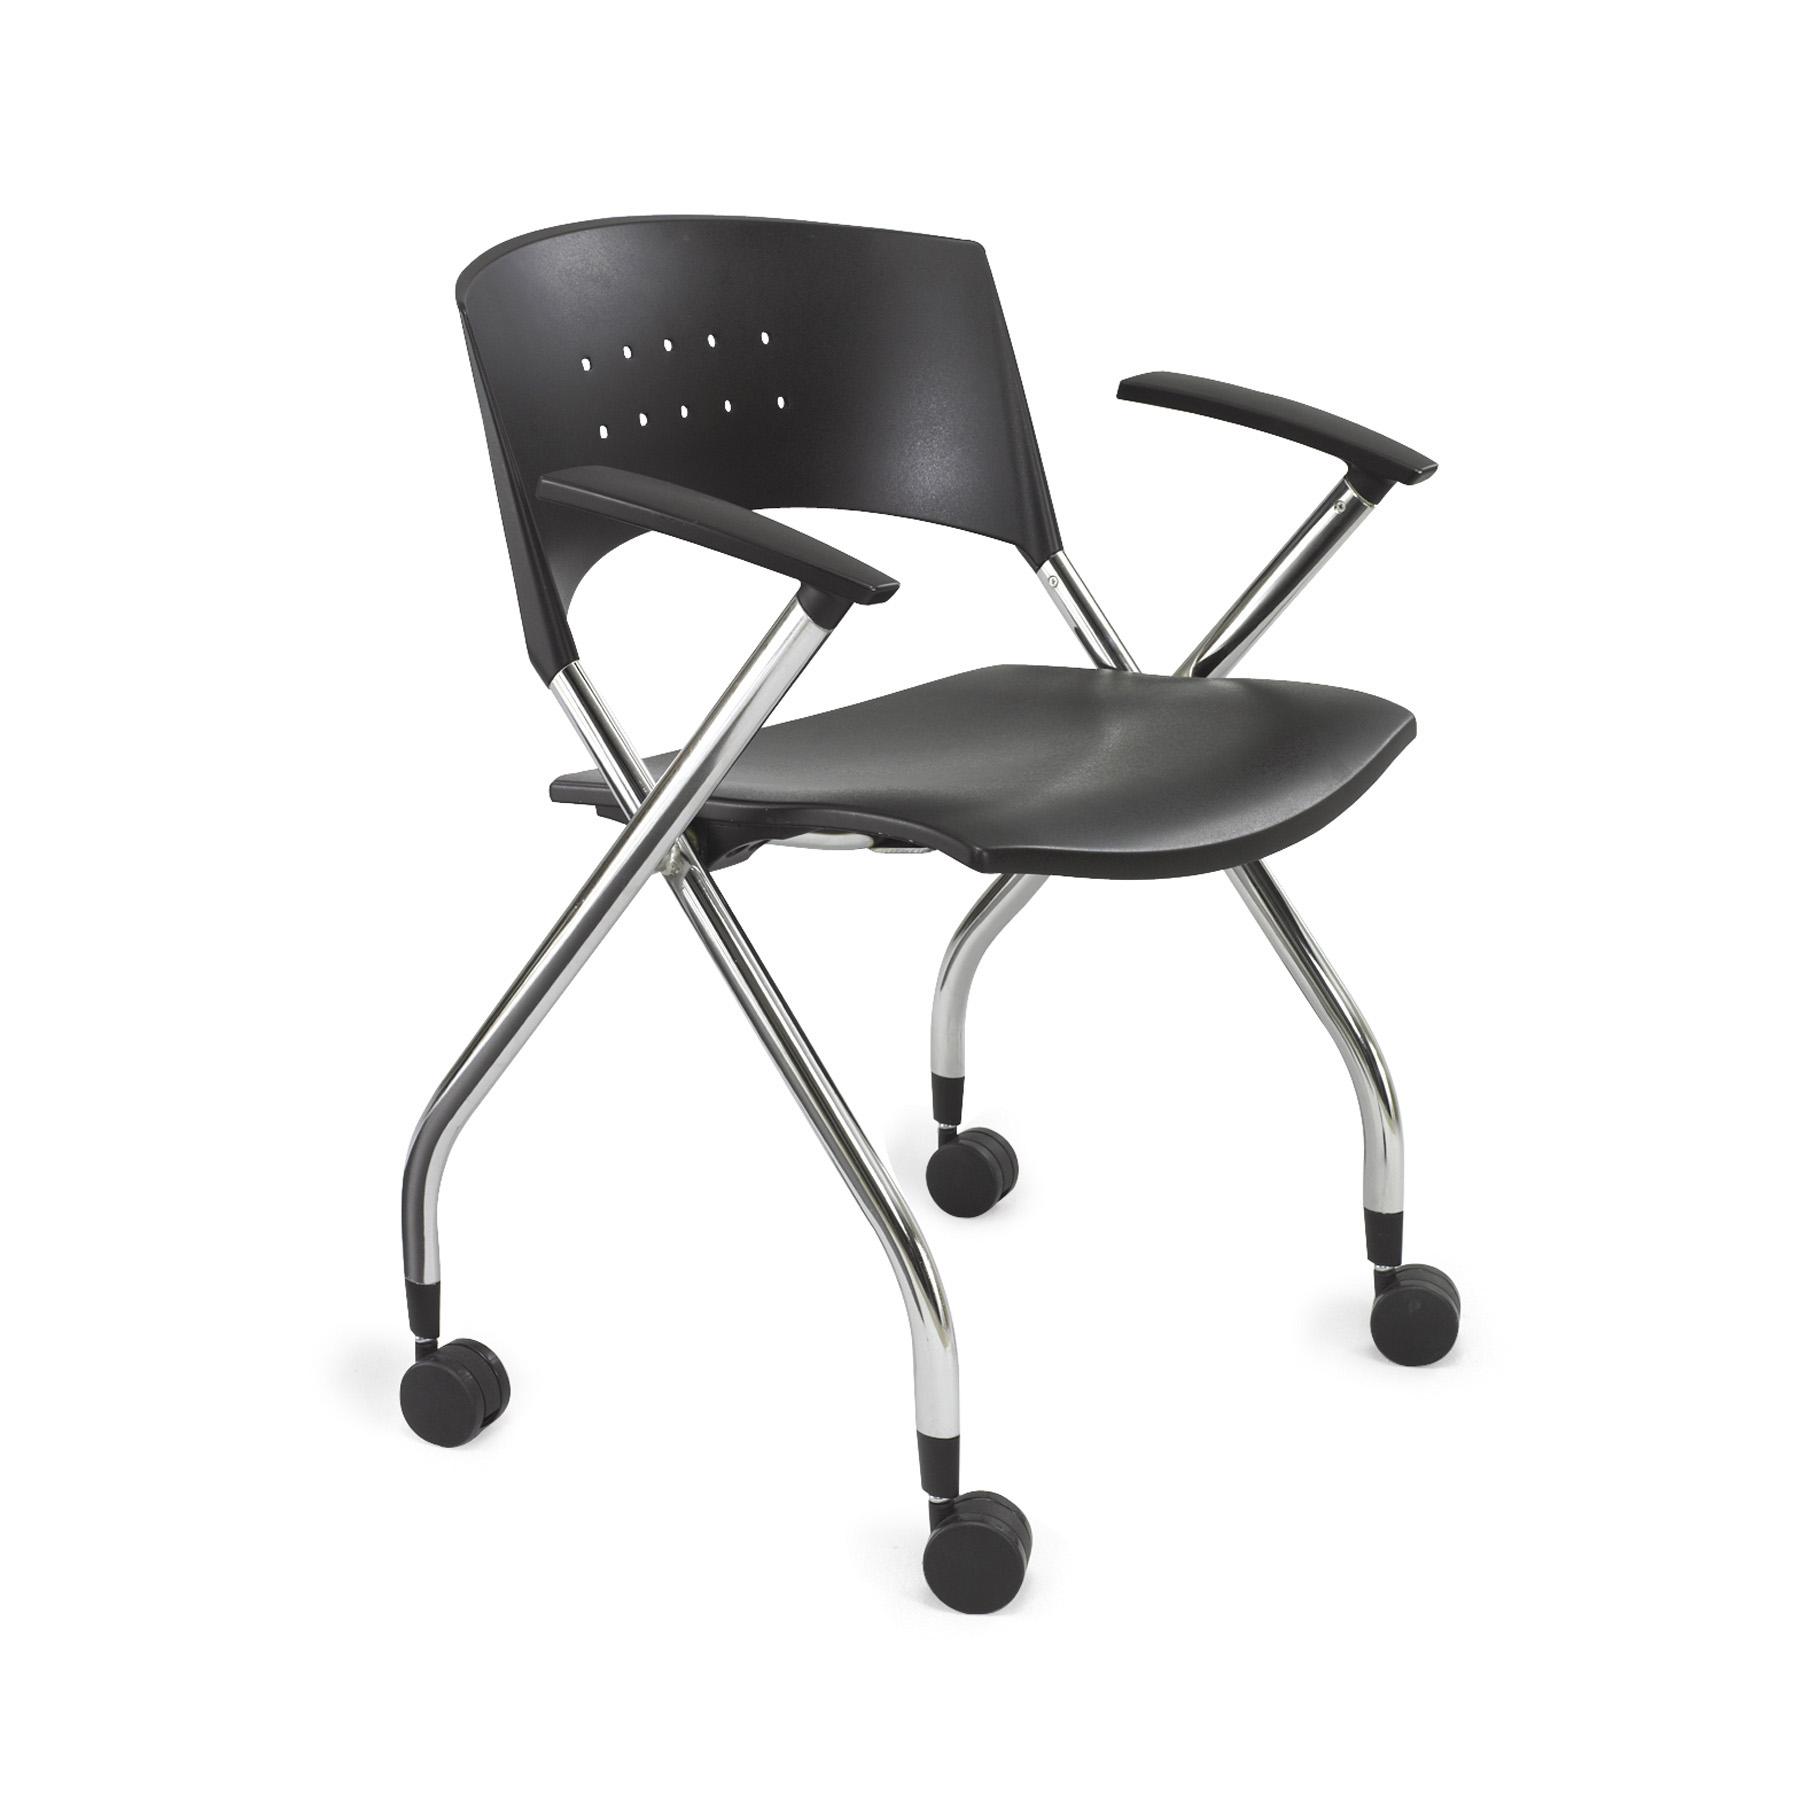 3480BL xtc Nesting Chair at Sale Pricing!